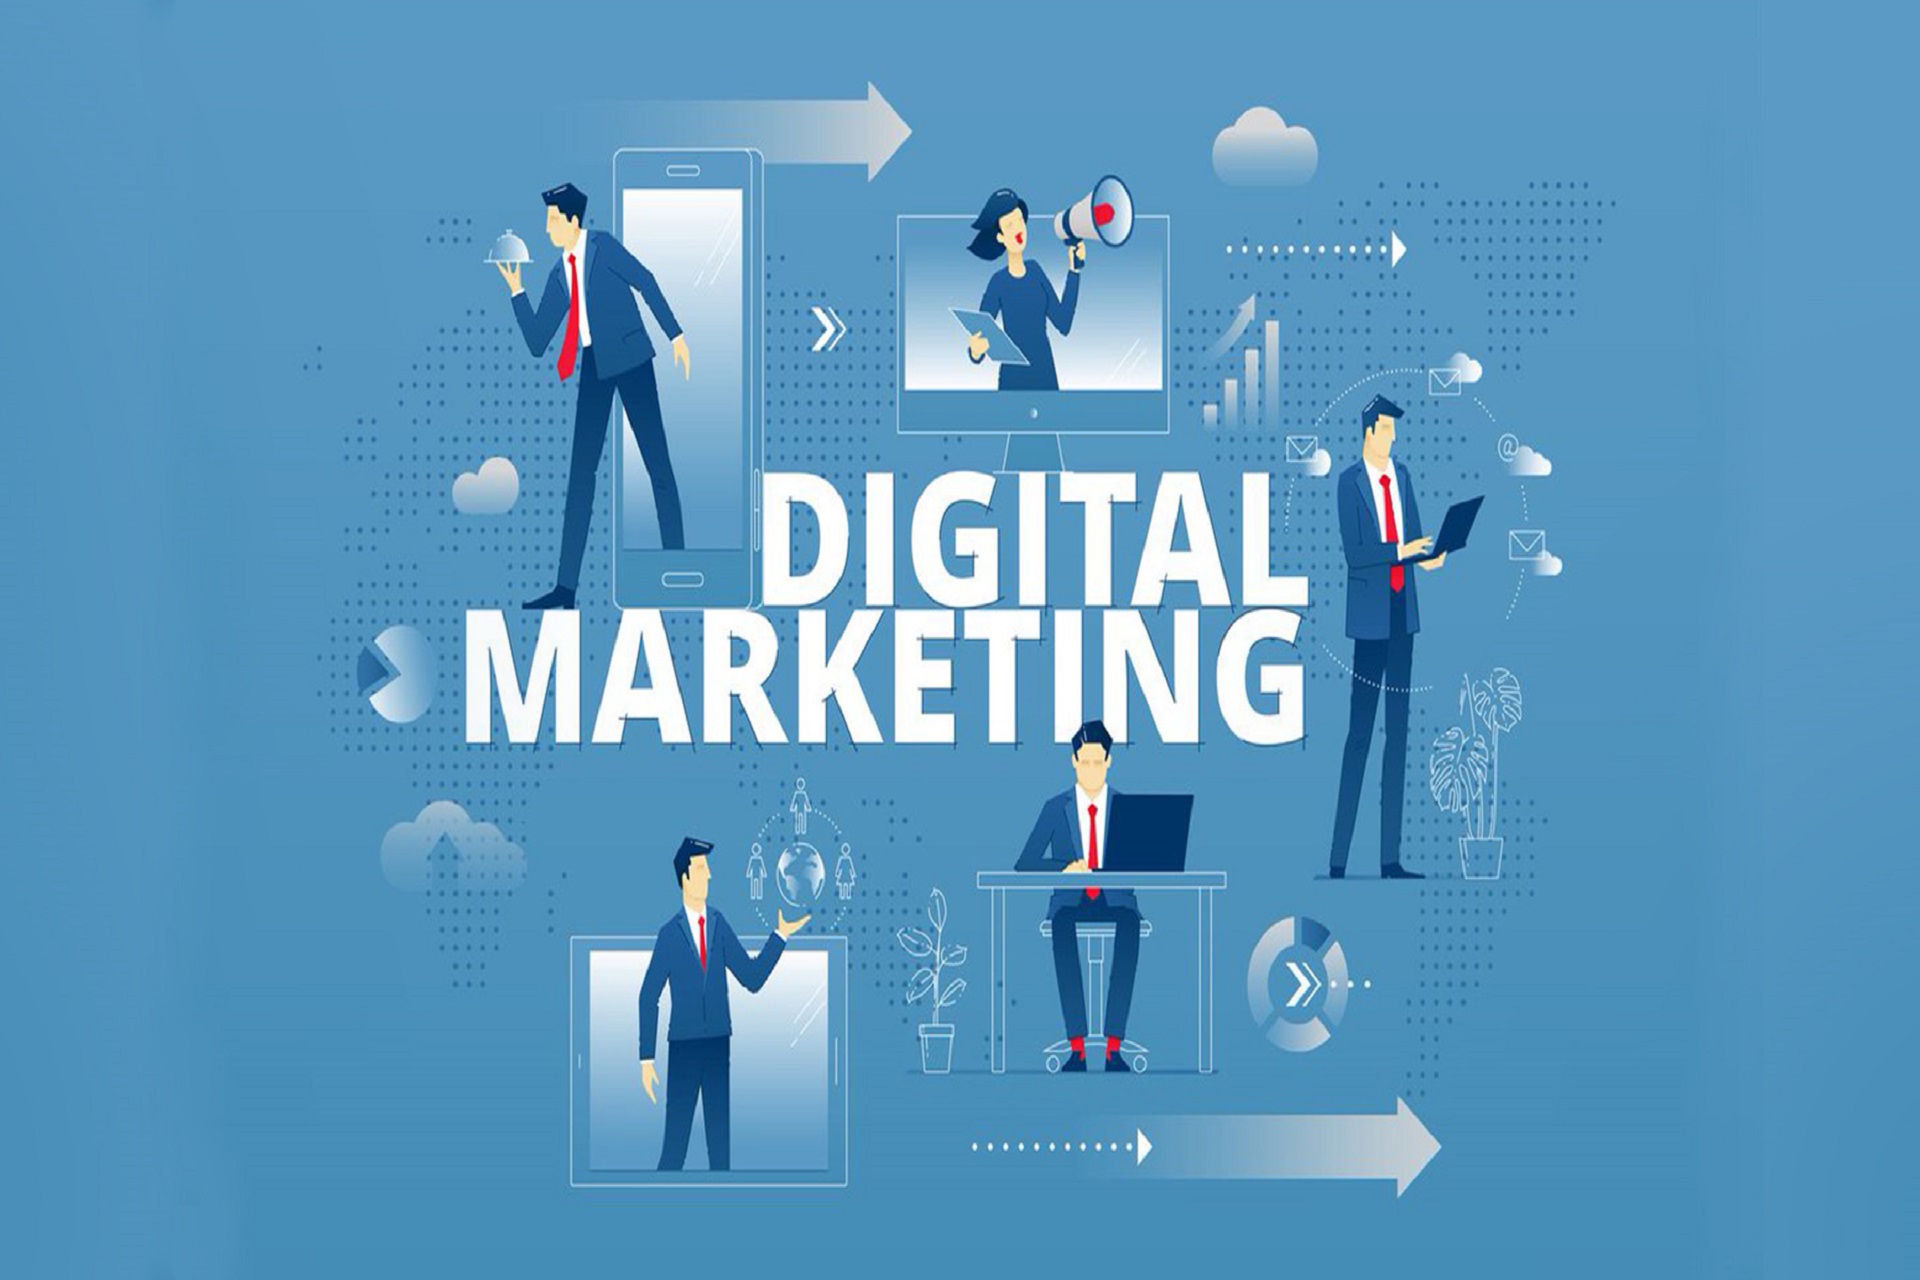 Our guidance for fostering a digital marketing agency technique